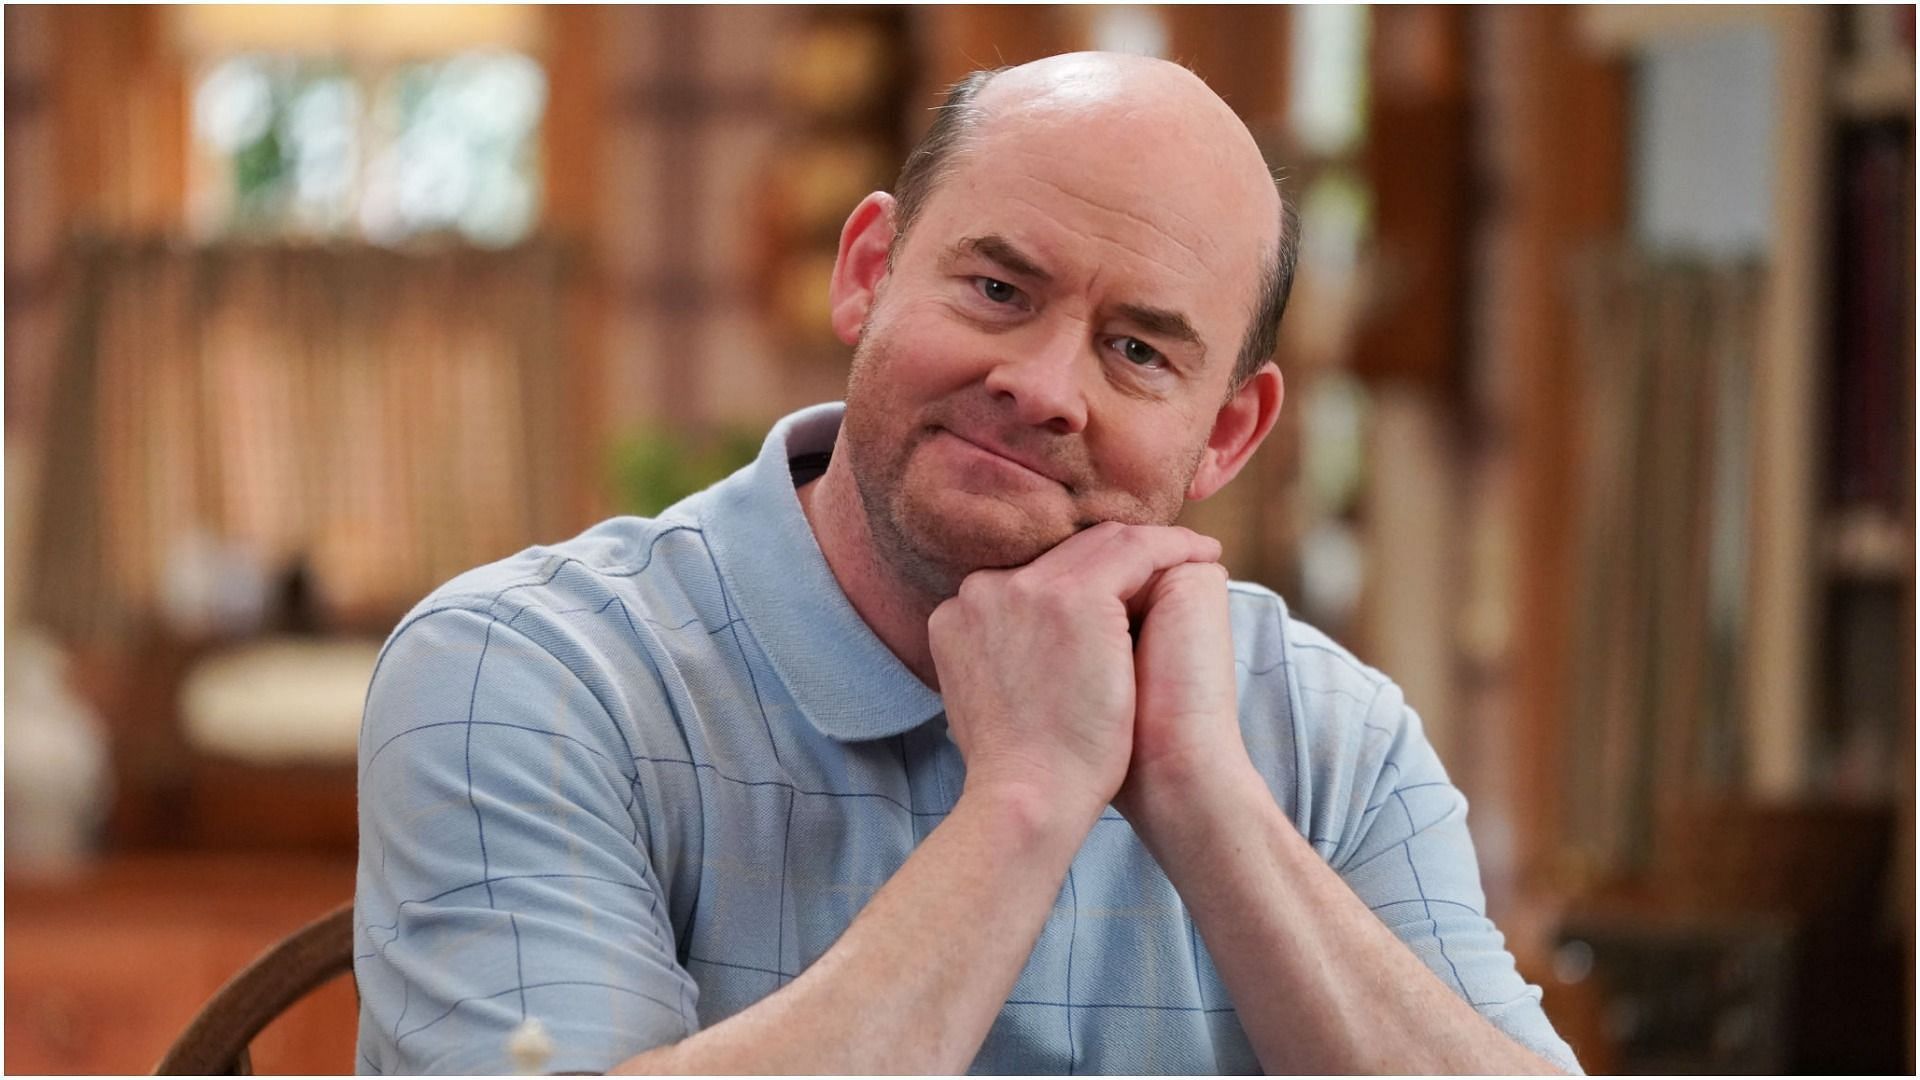 David Koechner in as Barry in The Goldbergs (Image via Richard Cartwright/Getty Images)